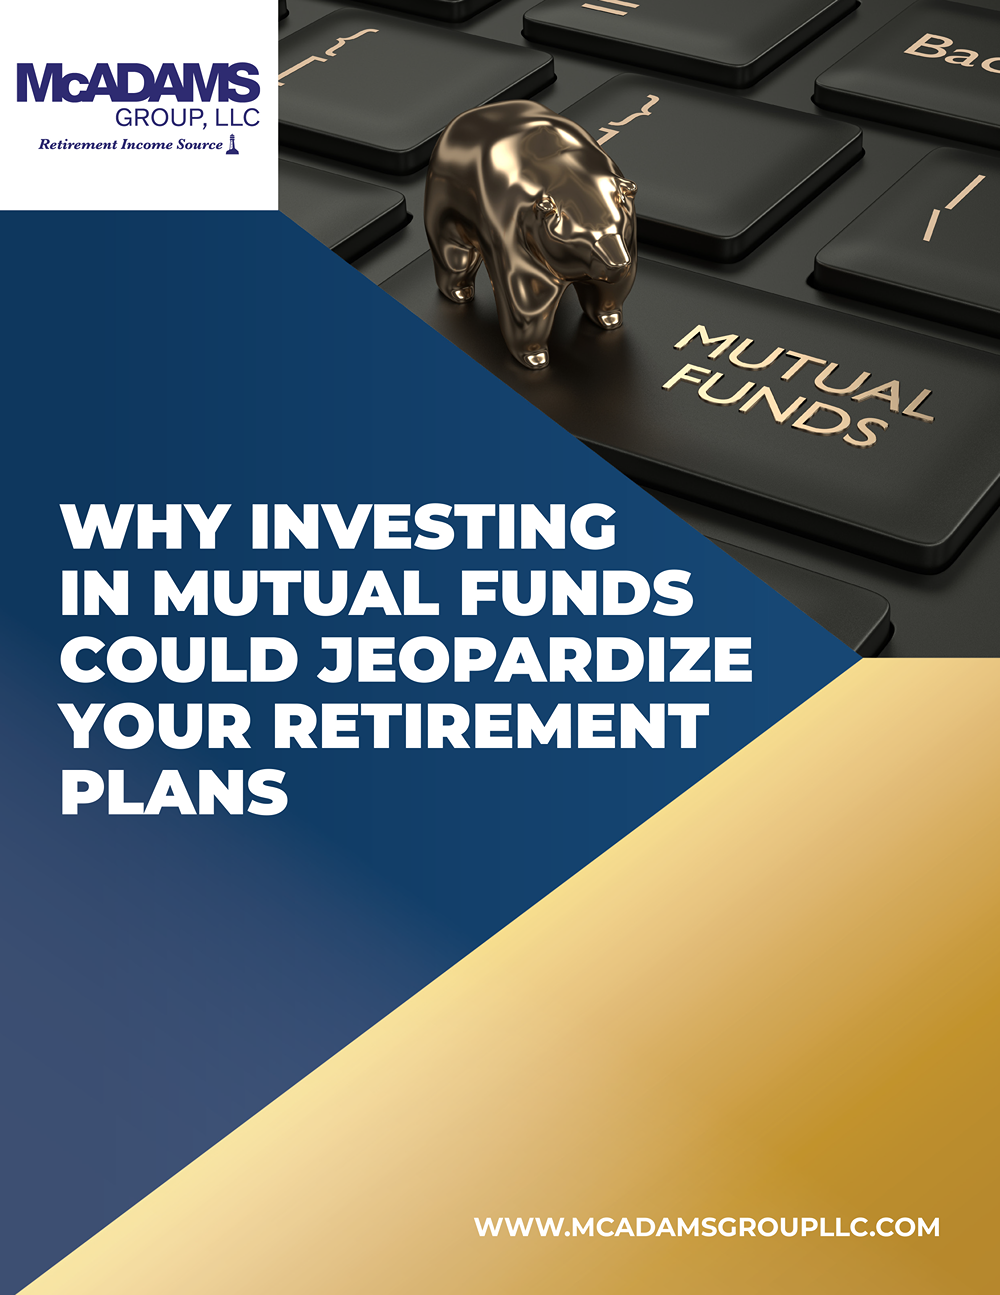 McAdams Group - Why Investing in Mutual Funds Could Jeopardize Your Retirement Plans-1